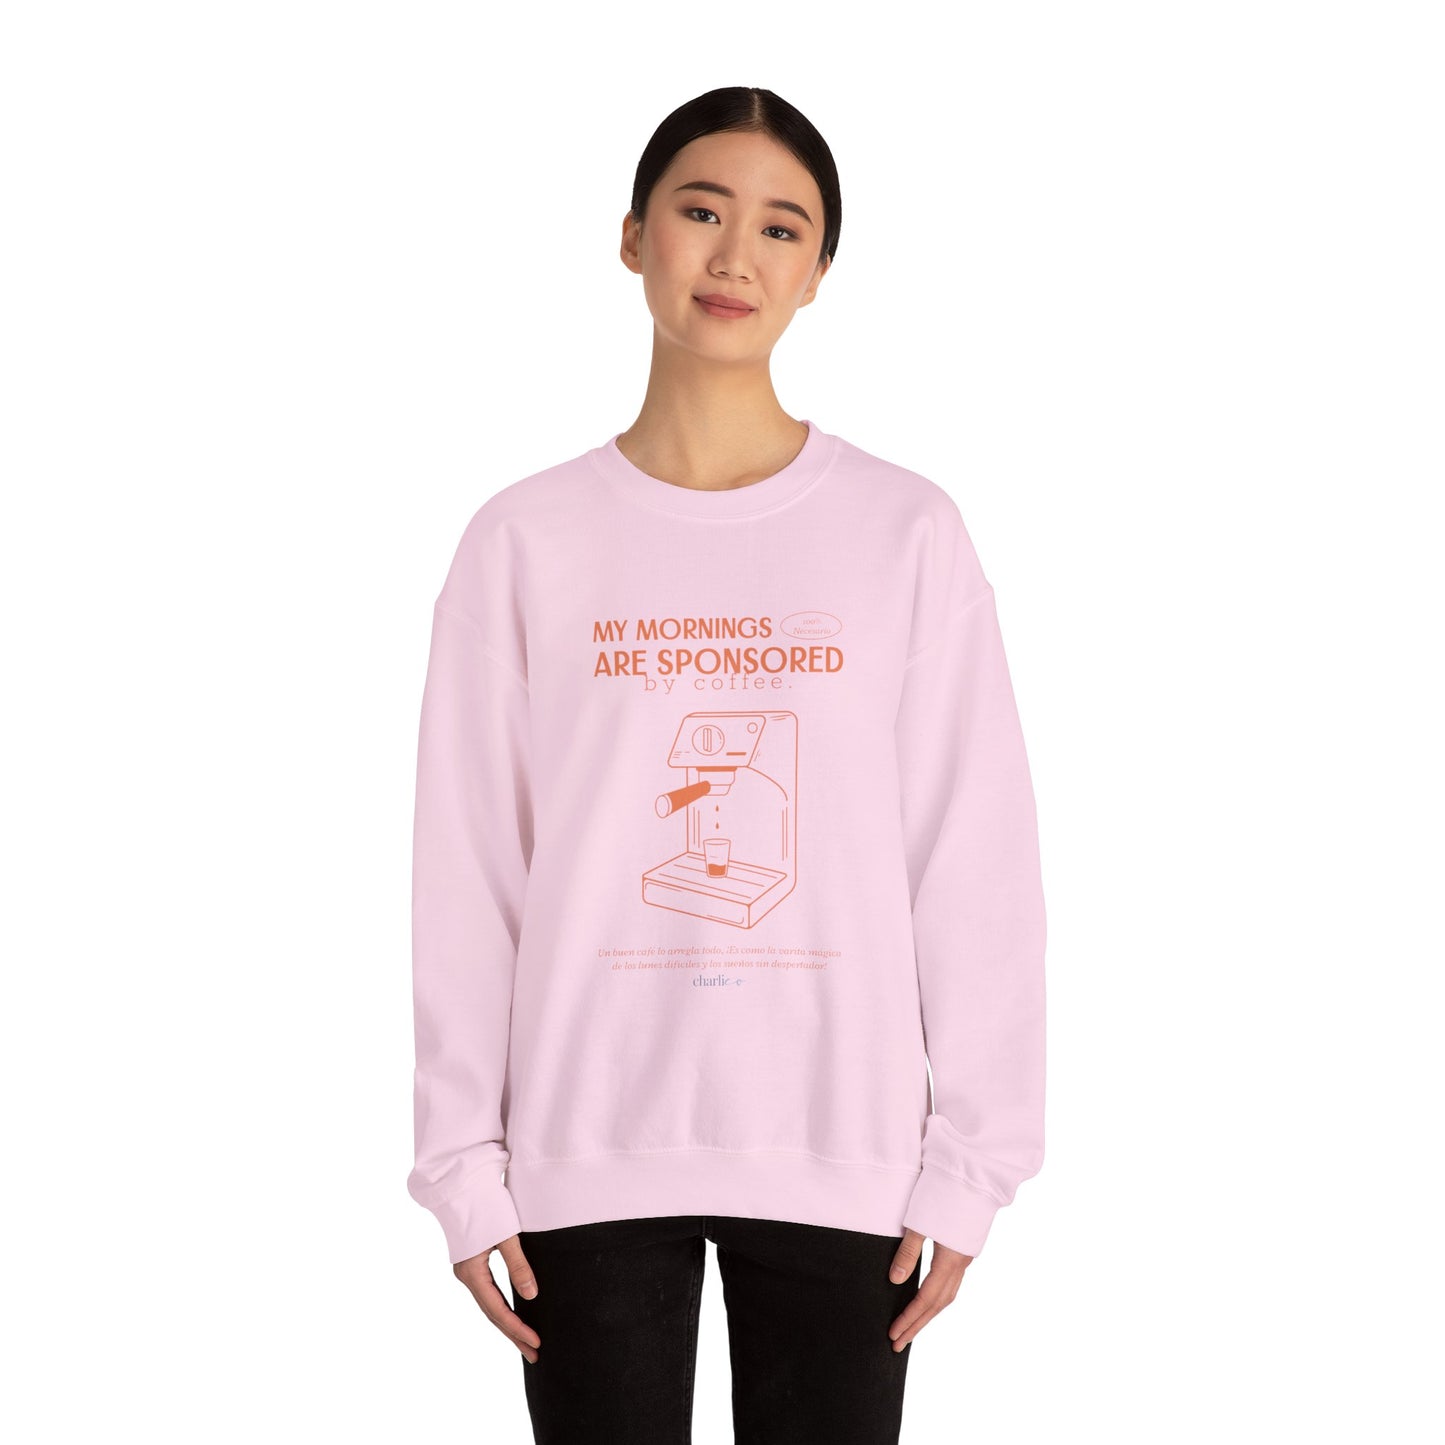 Sweatshirt crewneck -my morning are sponsored by coffee- pour adulte